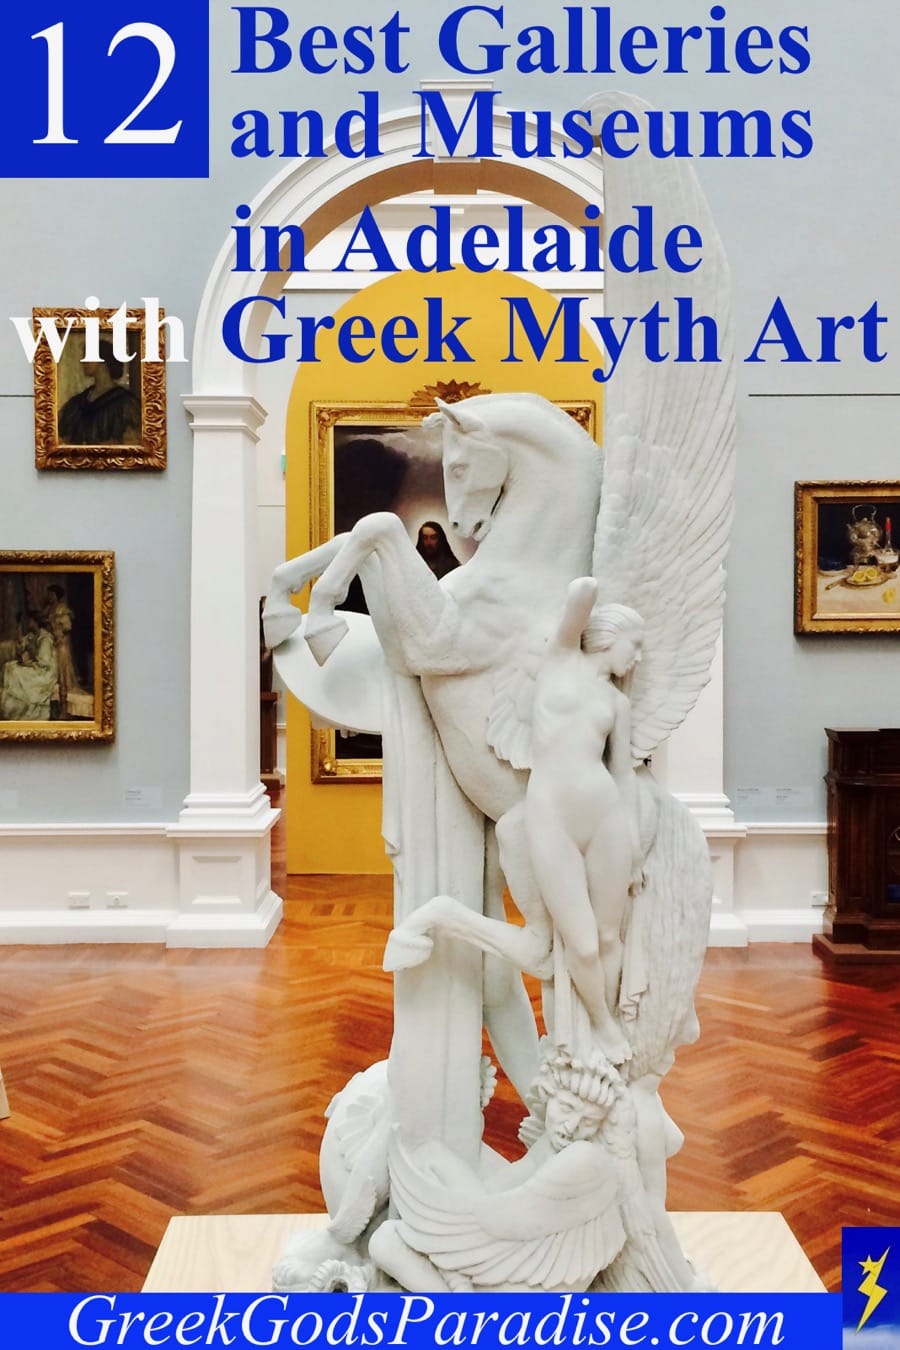 12 Best Galleries and Museums in Adelaide with Greek Myth Art